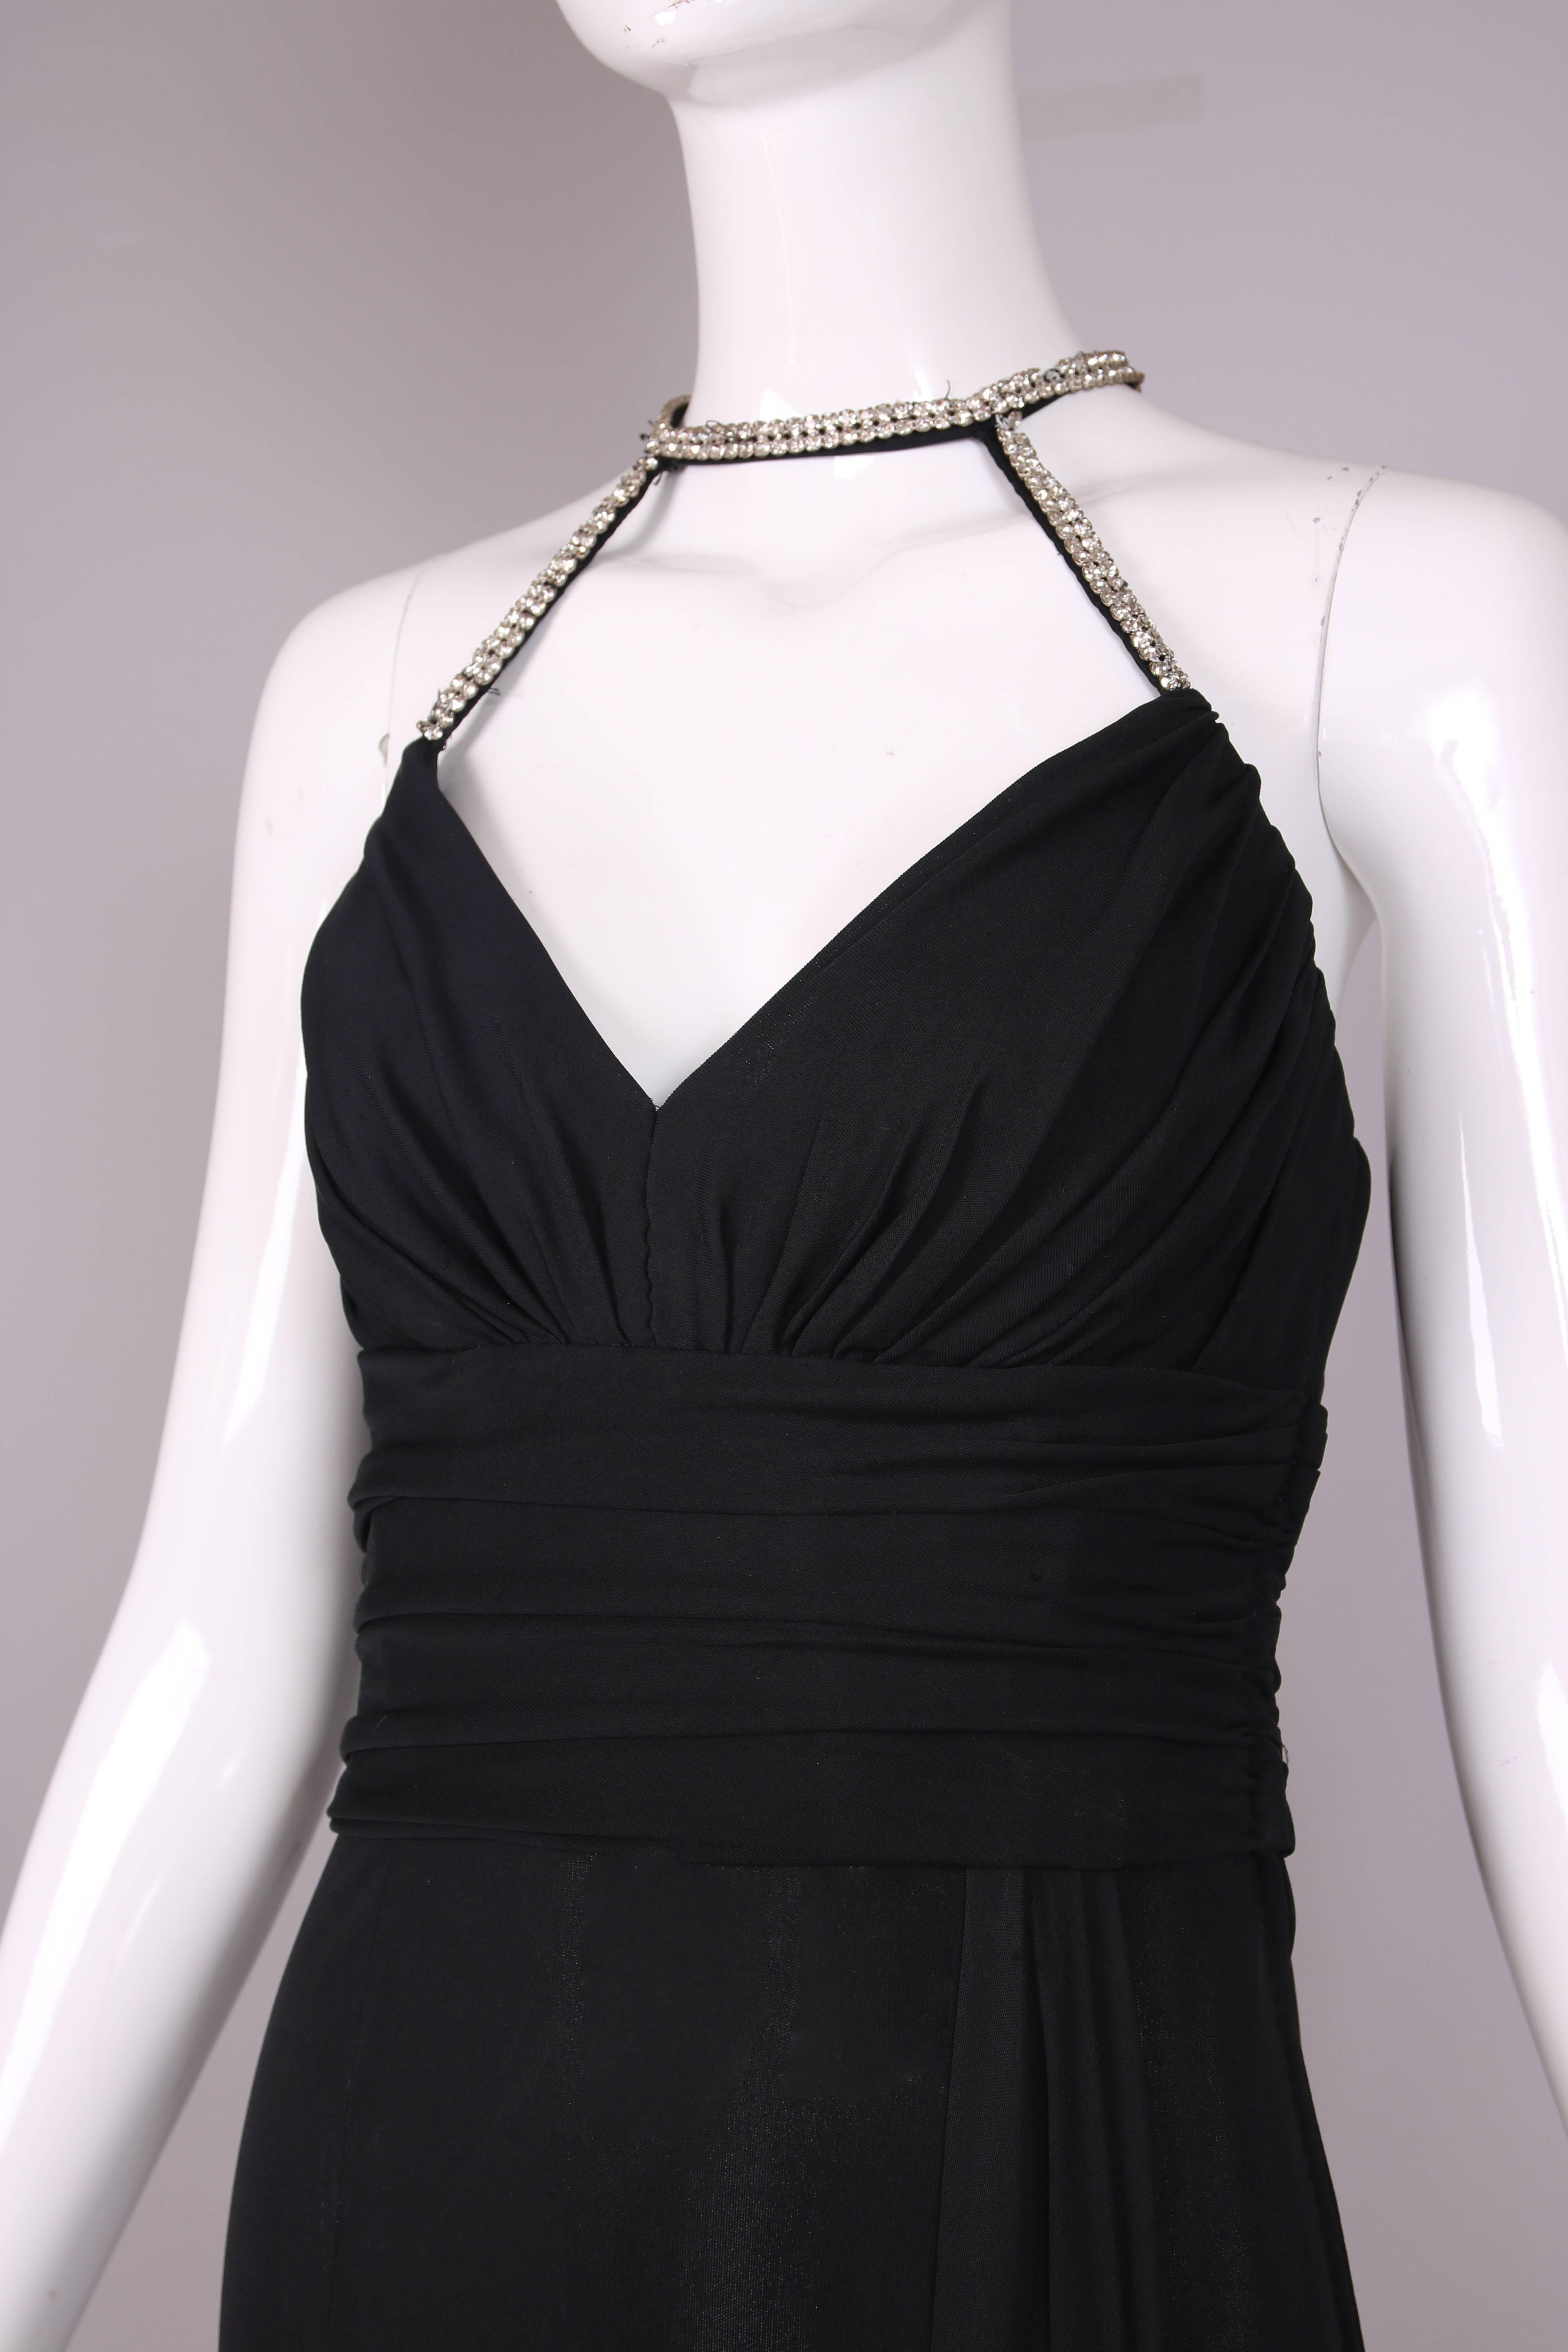 1998 A/H Chanel Black Draped Evening Gown w/Rhinestone Shoulder & Neck Straps In Excellent Condition In Studio City, CA